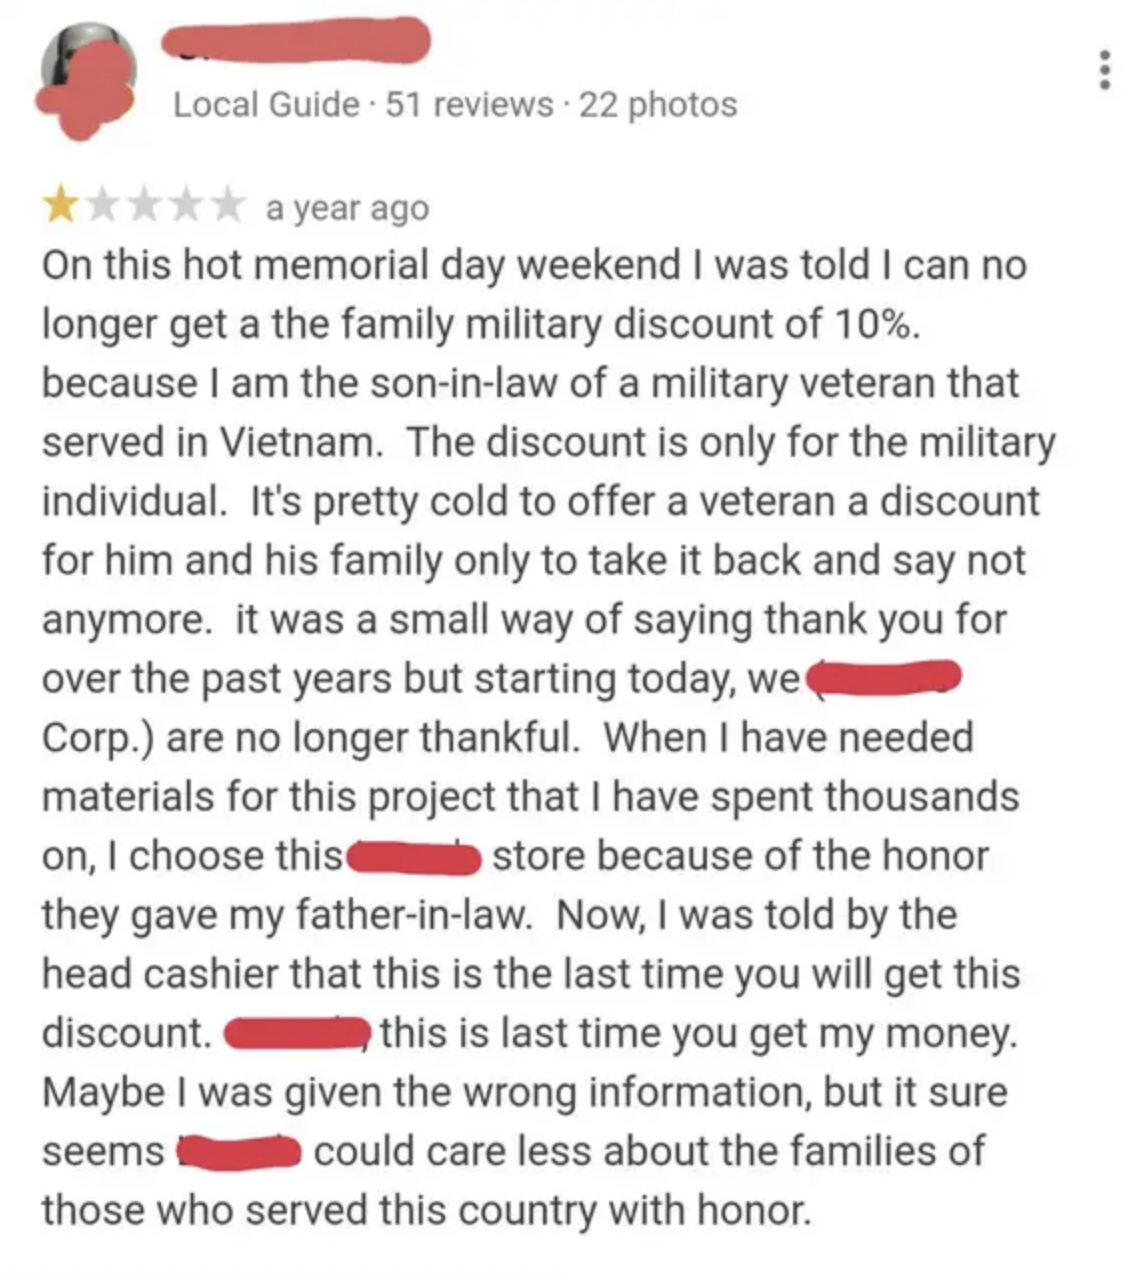 The review is basically a long rant about how the store is disrespectful and &quot;couldn&#x27;t care less about the families of those who served this country with honor&quot;